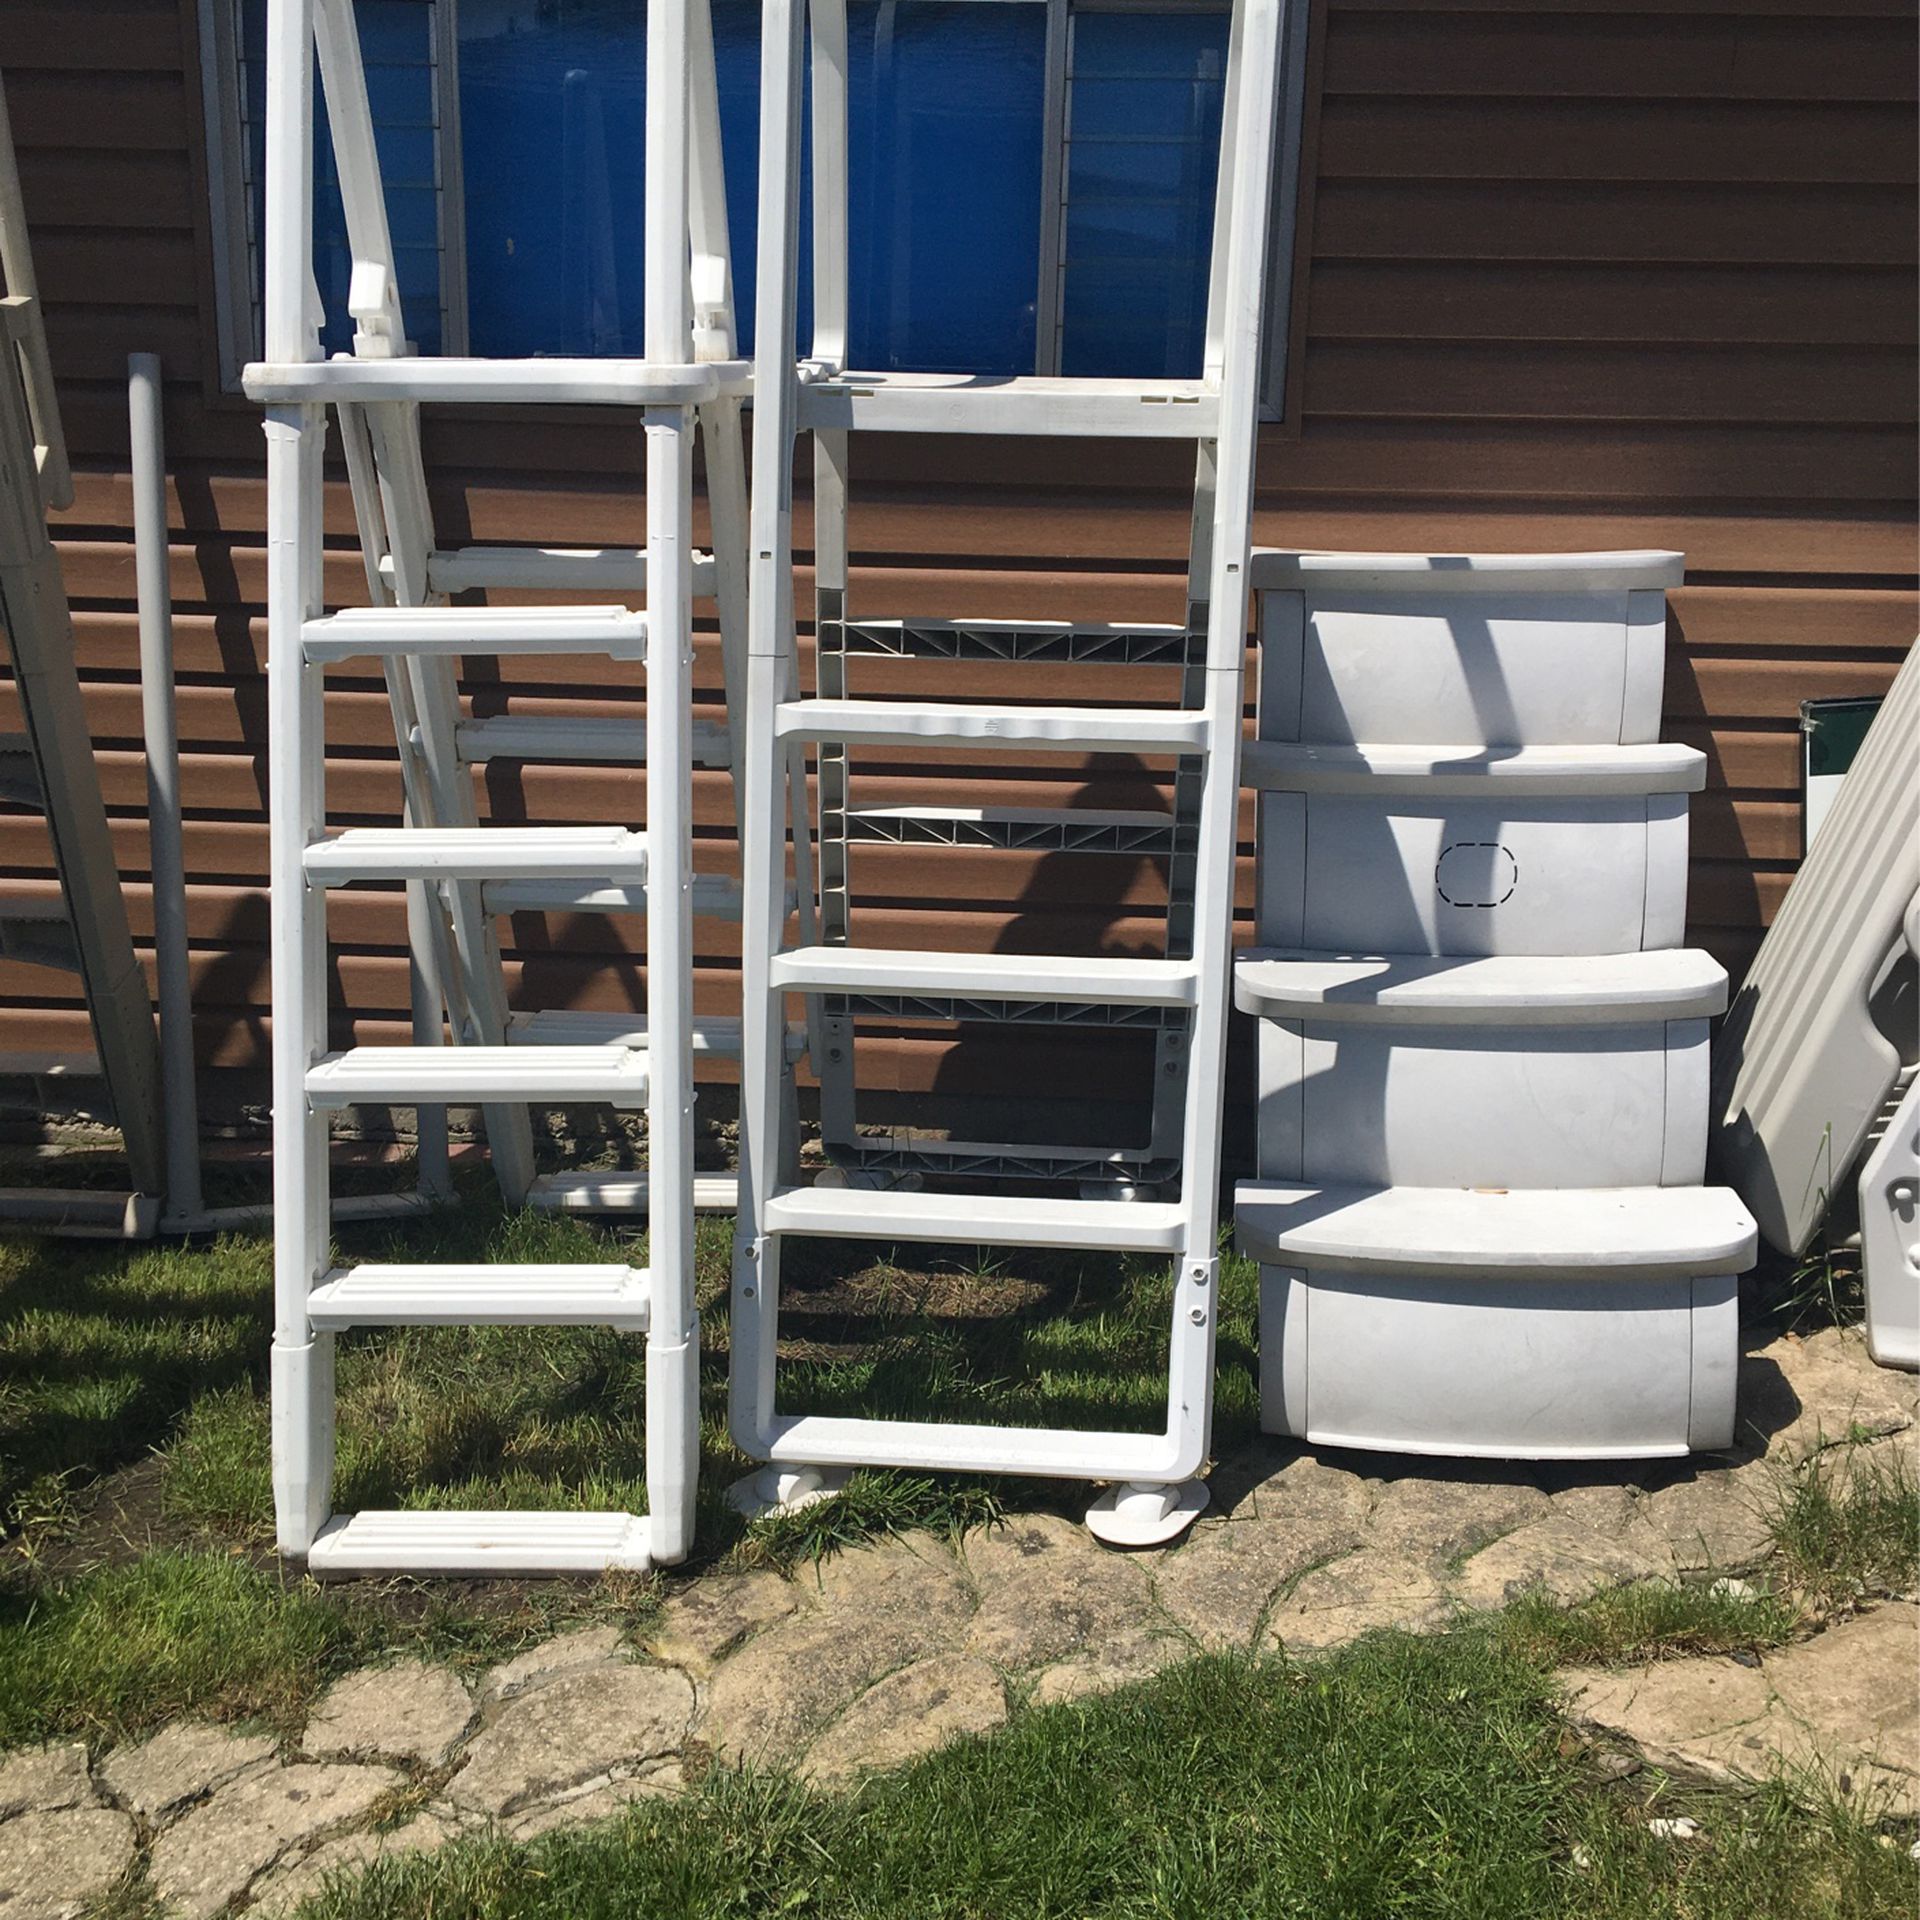 Several swimming pool ladders deck ladders stairs from $125 to 180